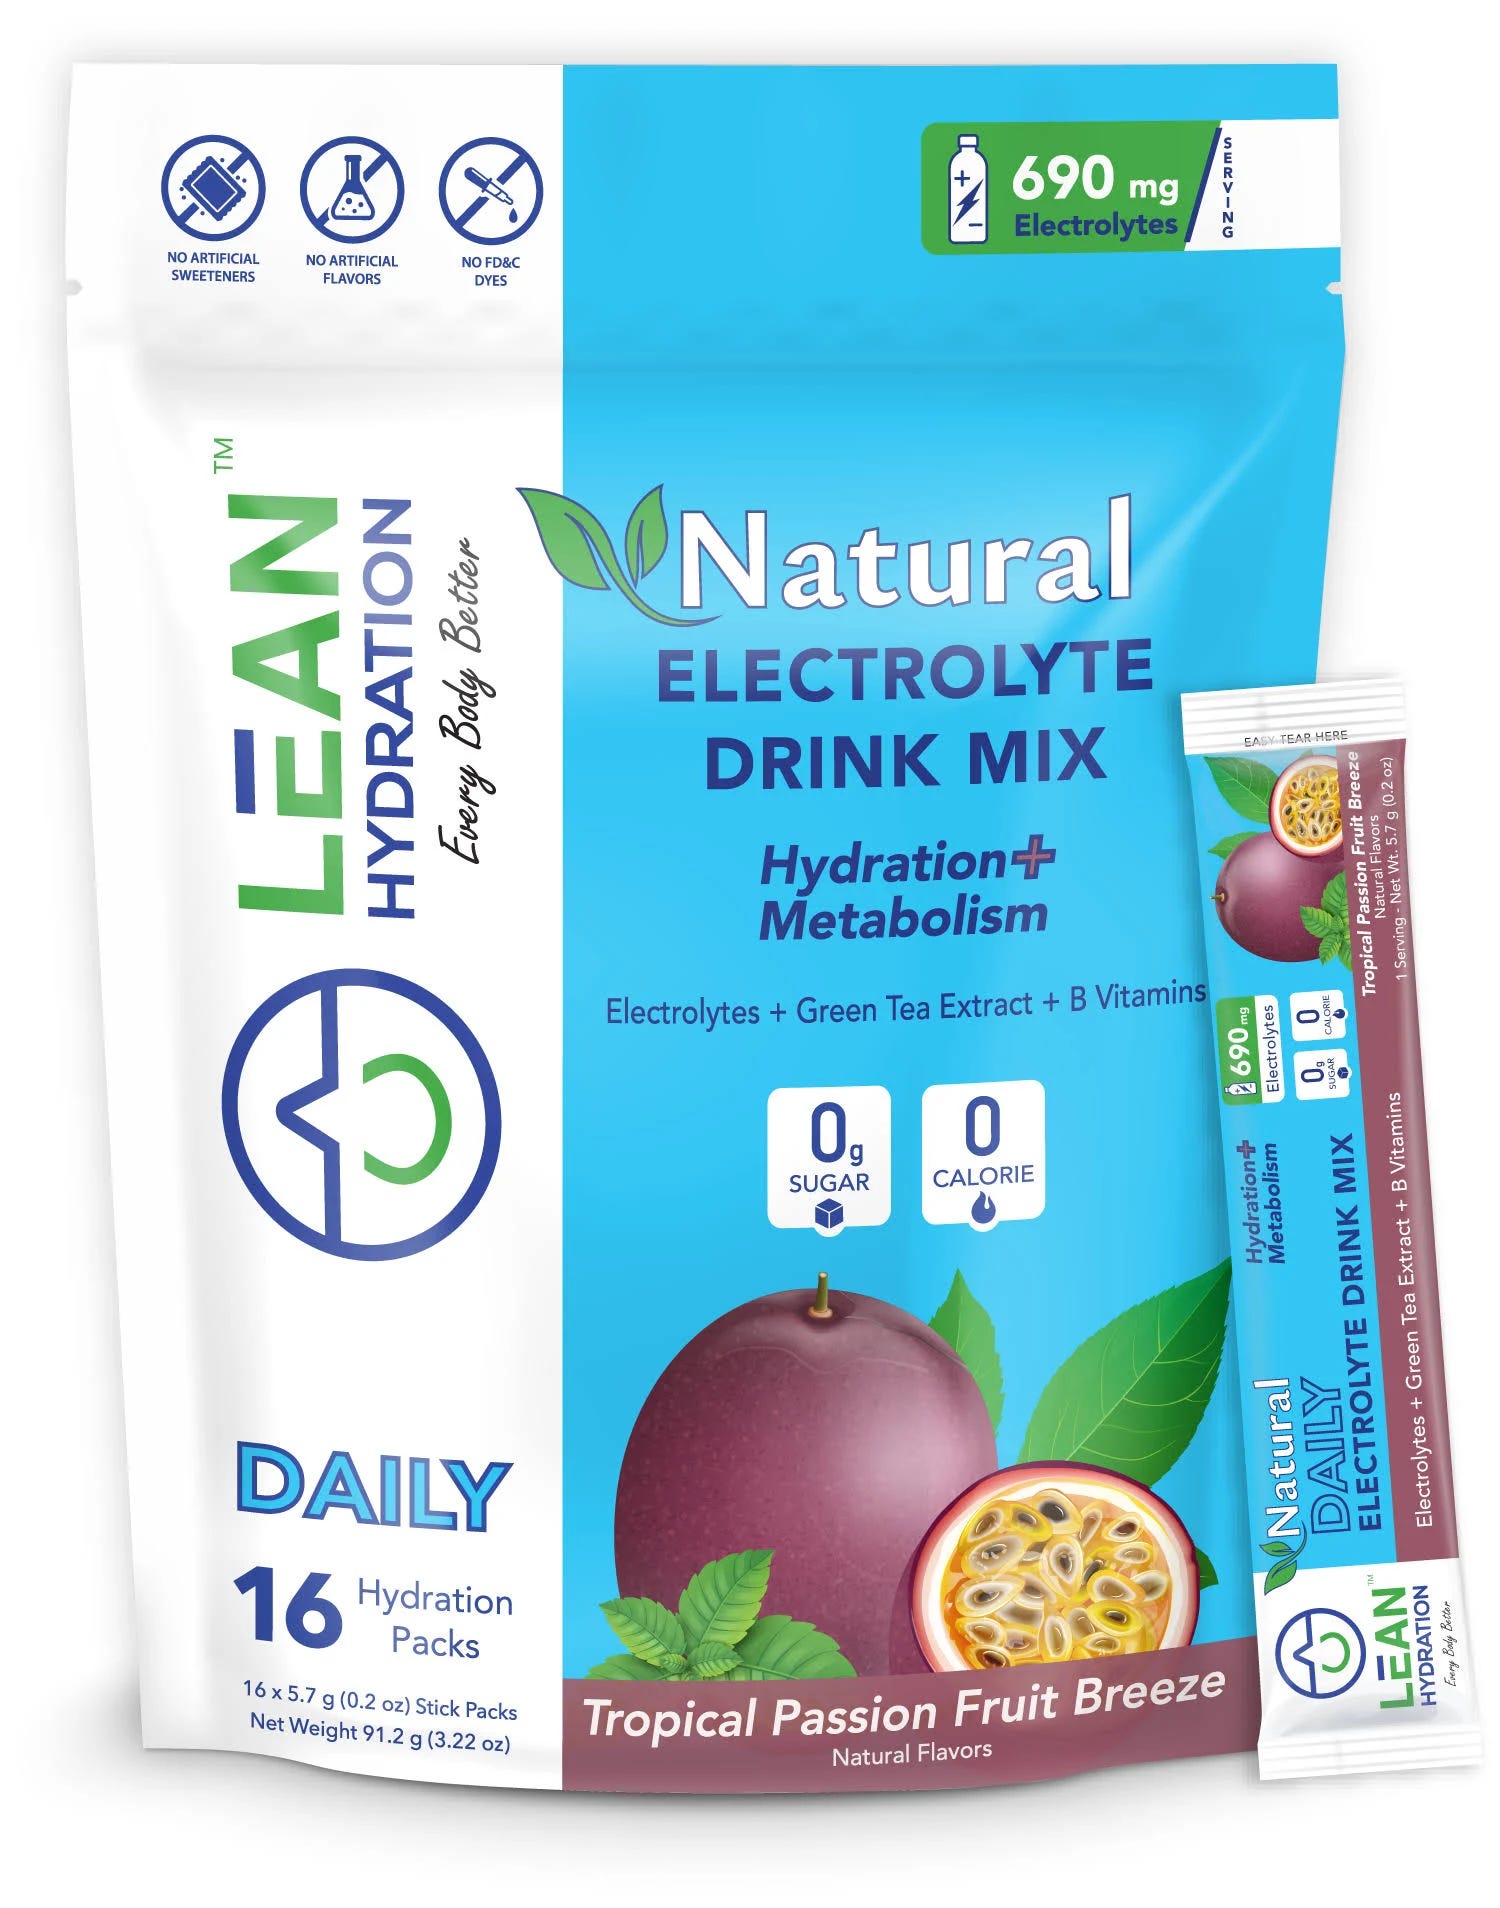 Natural Electrolyte Powder for Hydration and Energy | Image